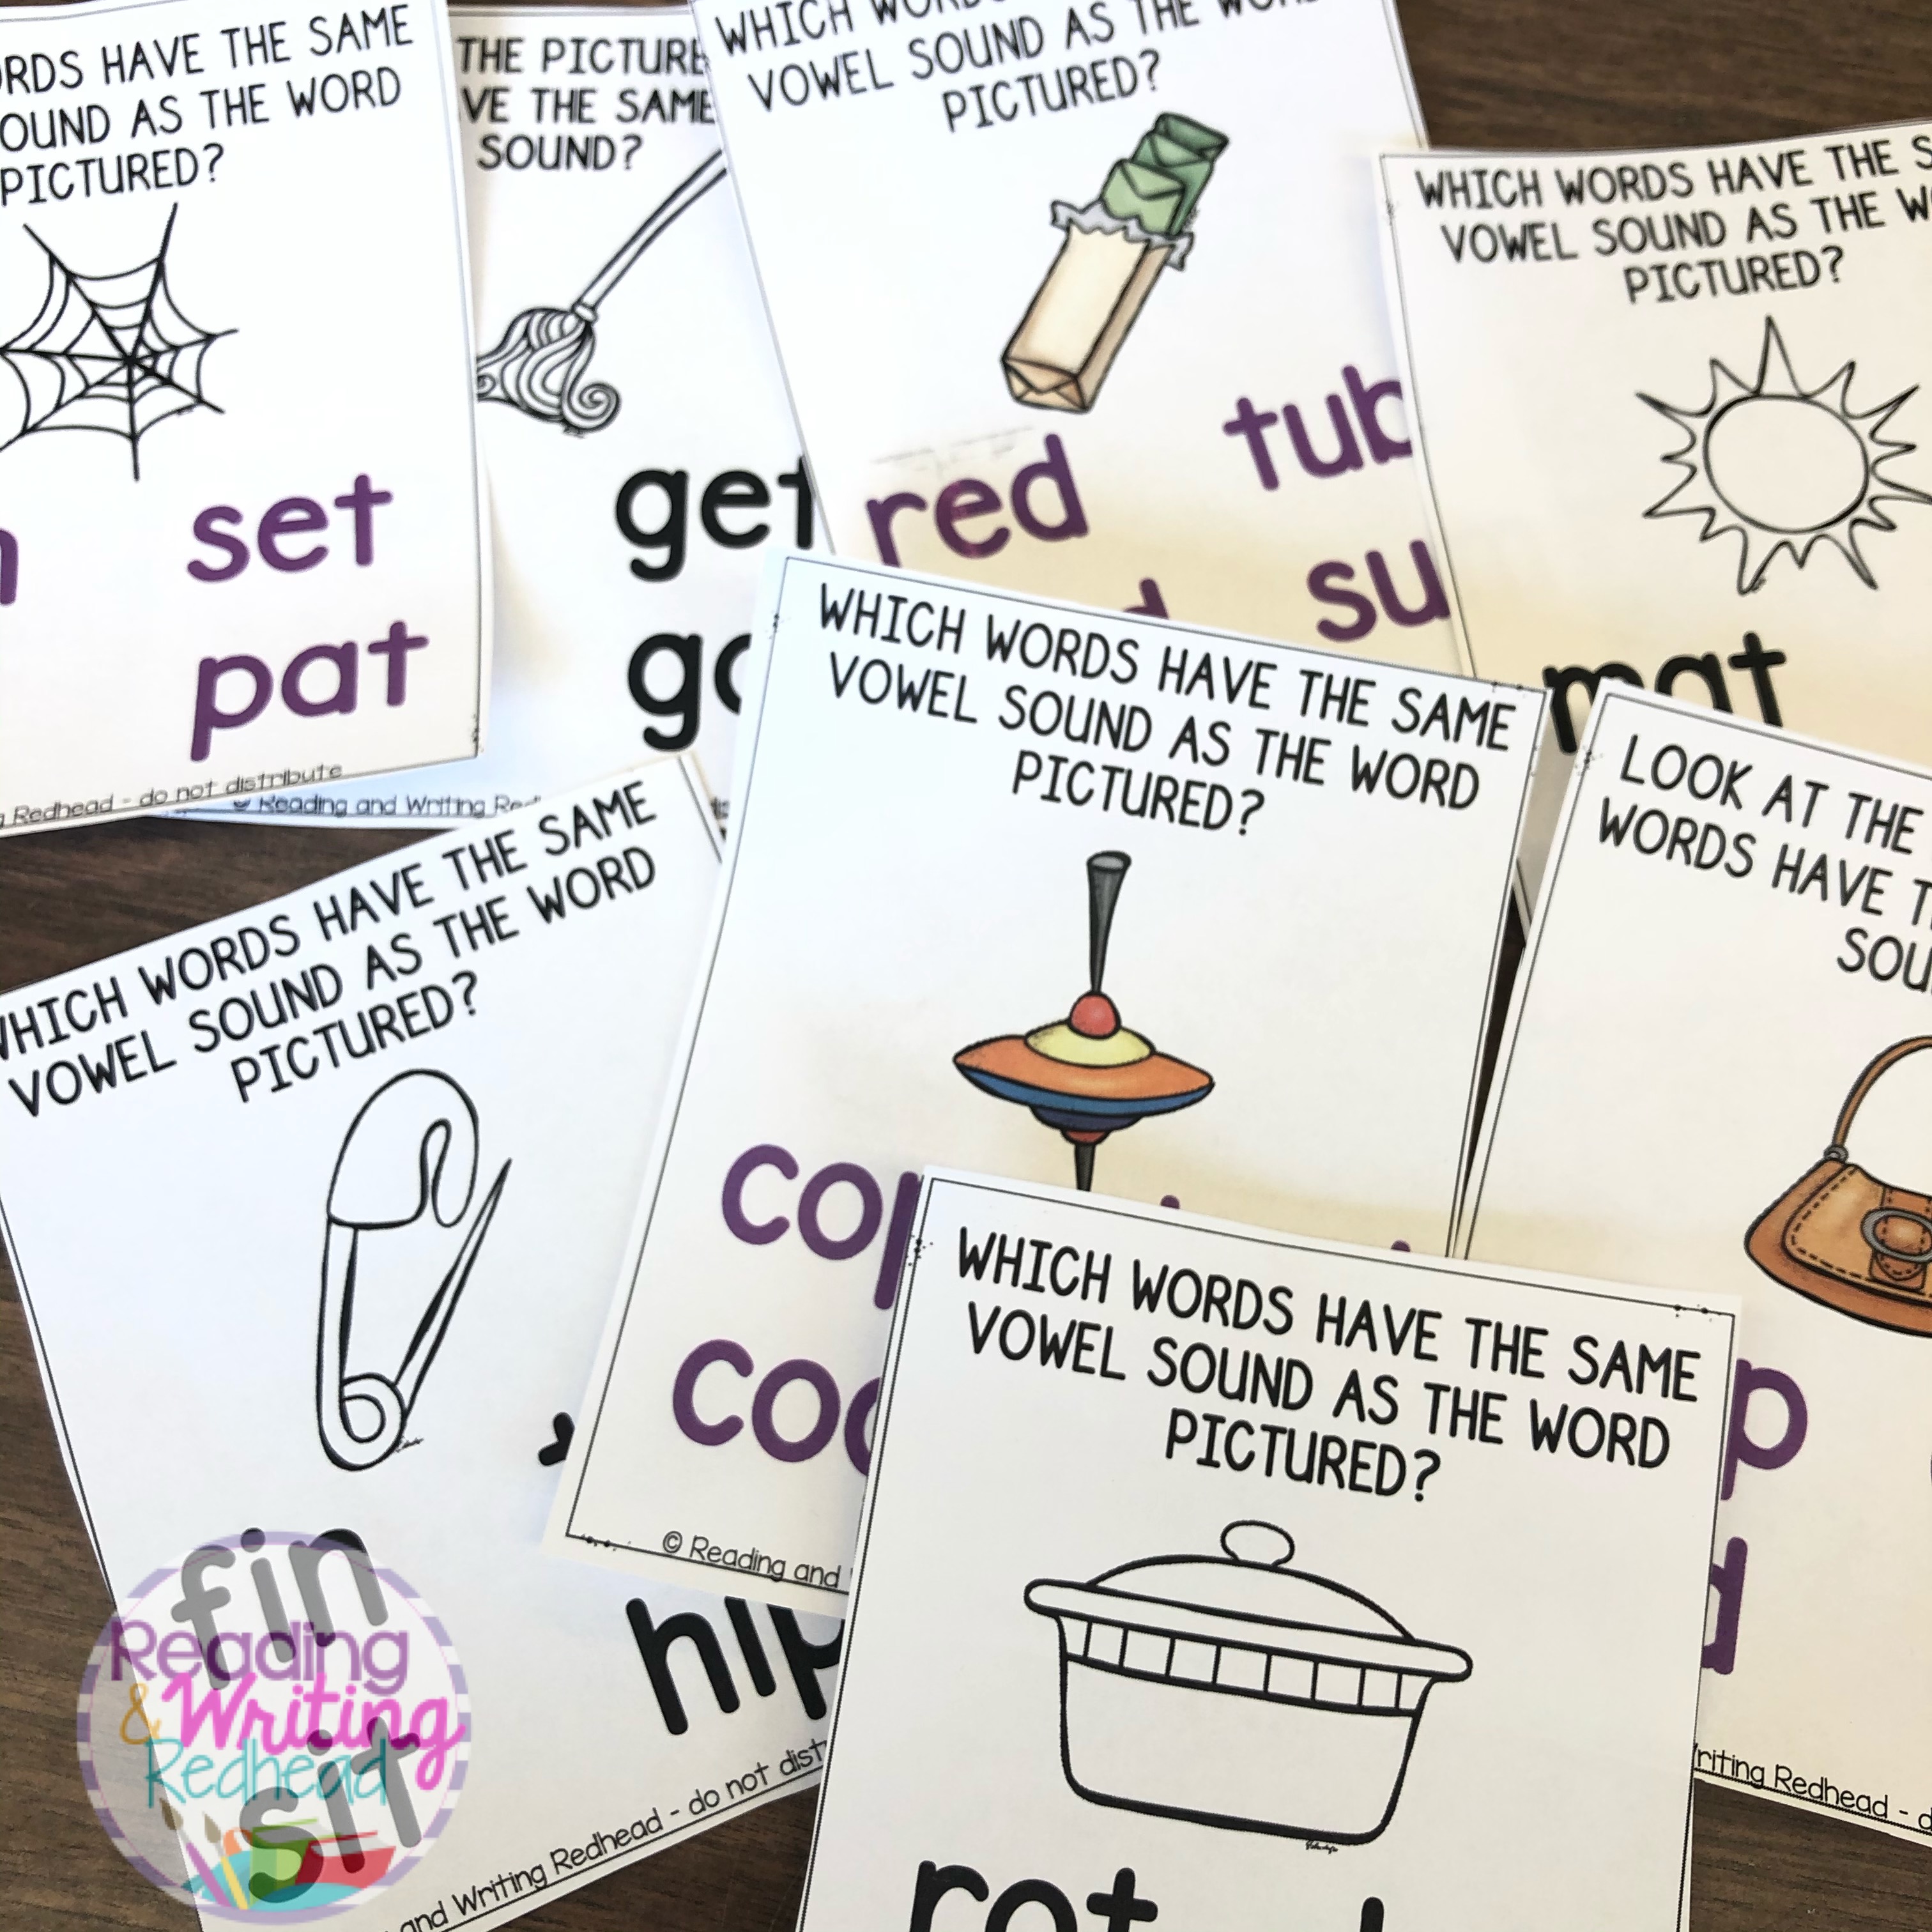 Which words have the same vowel sound?